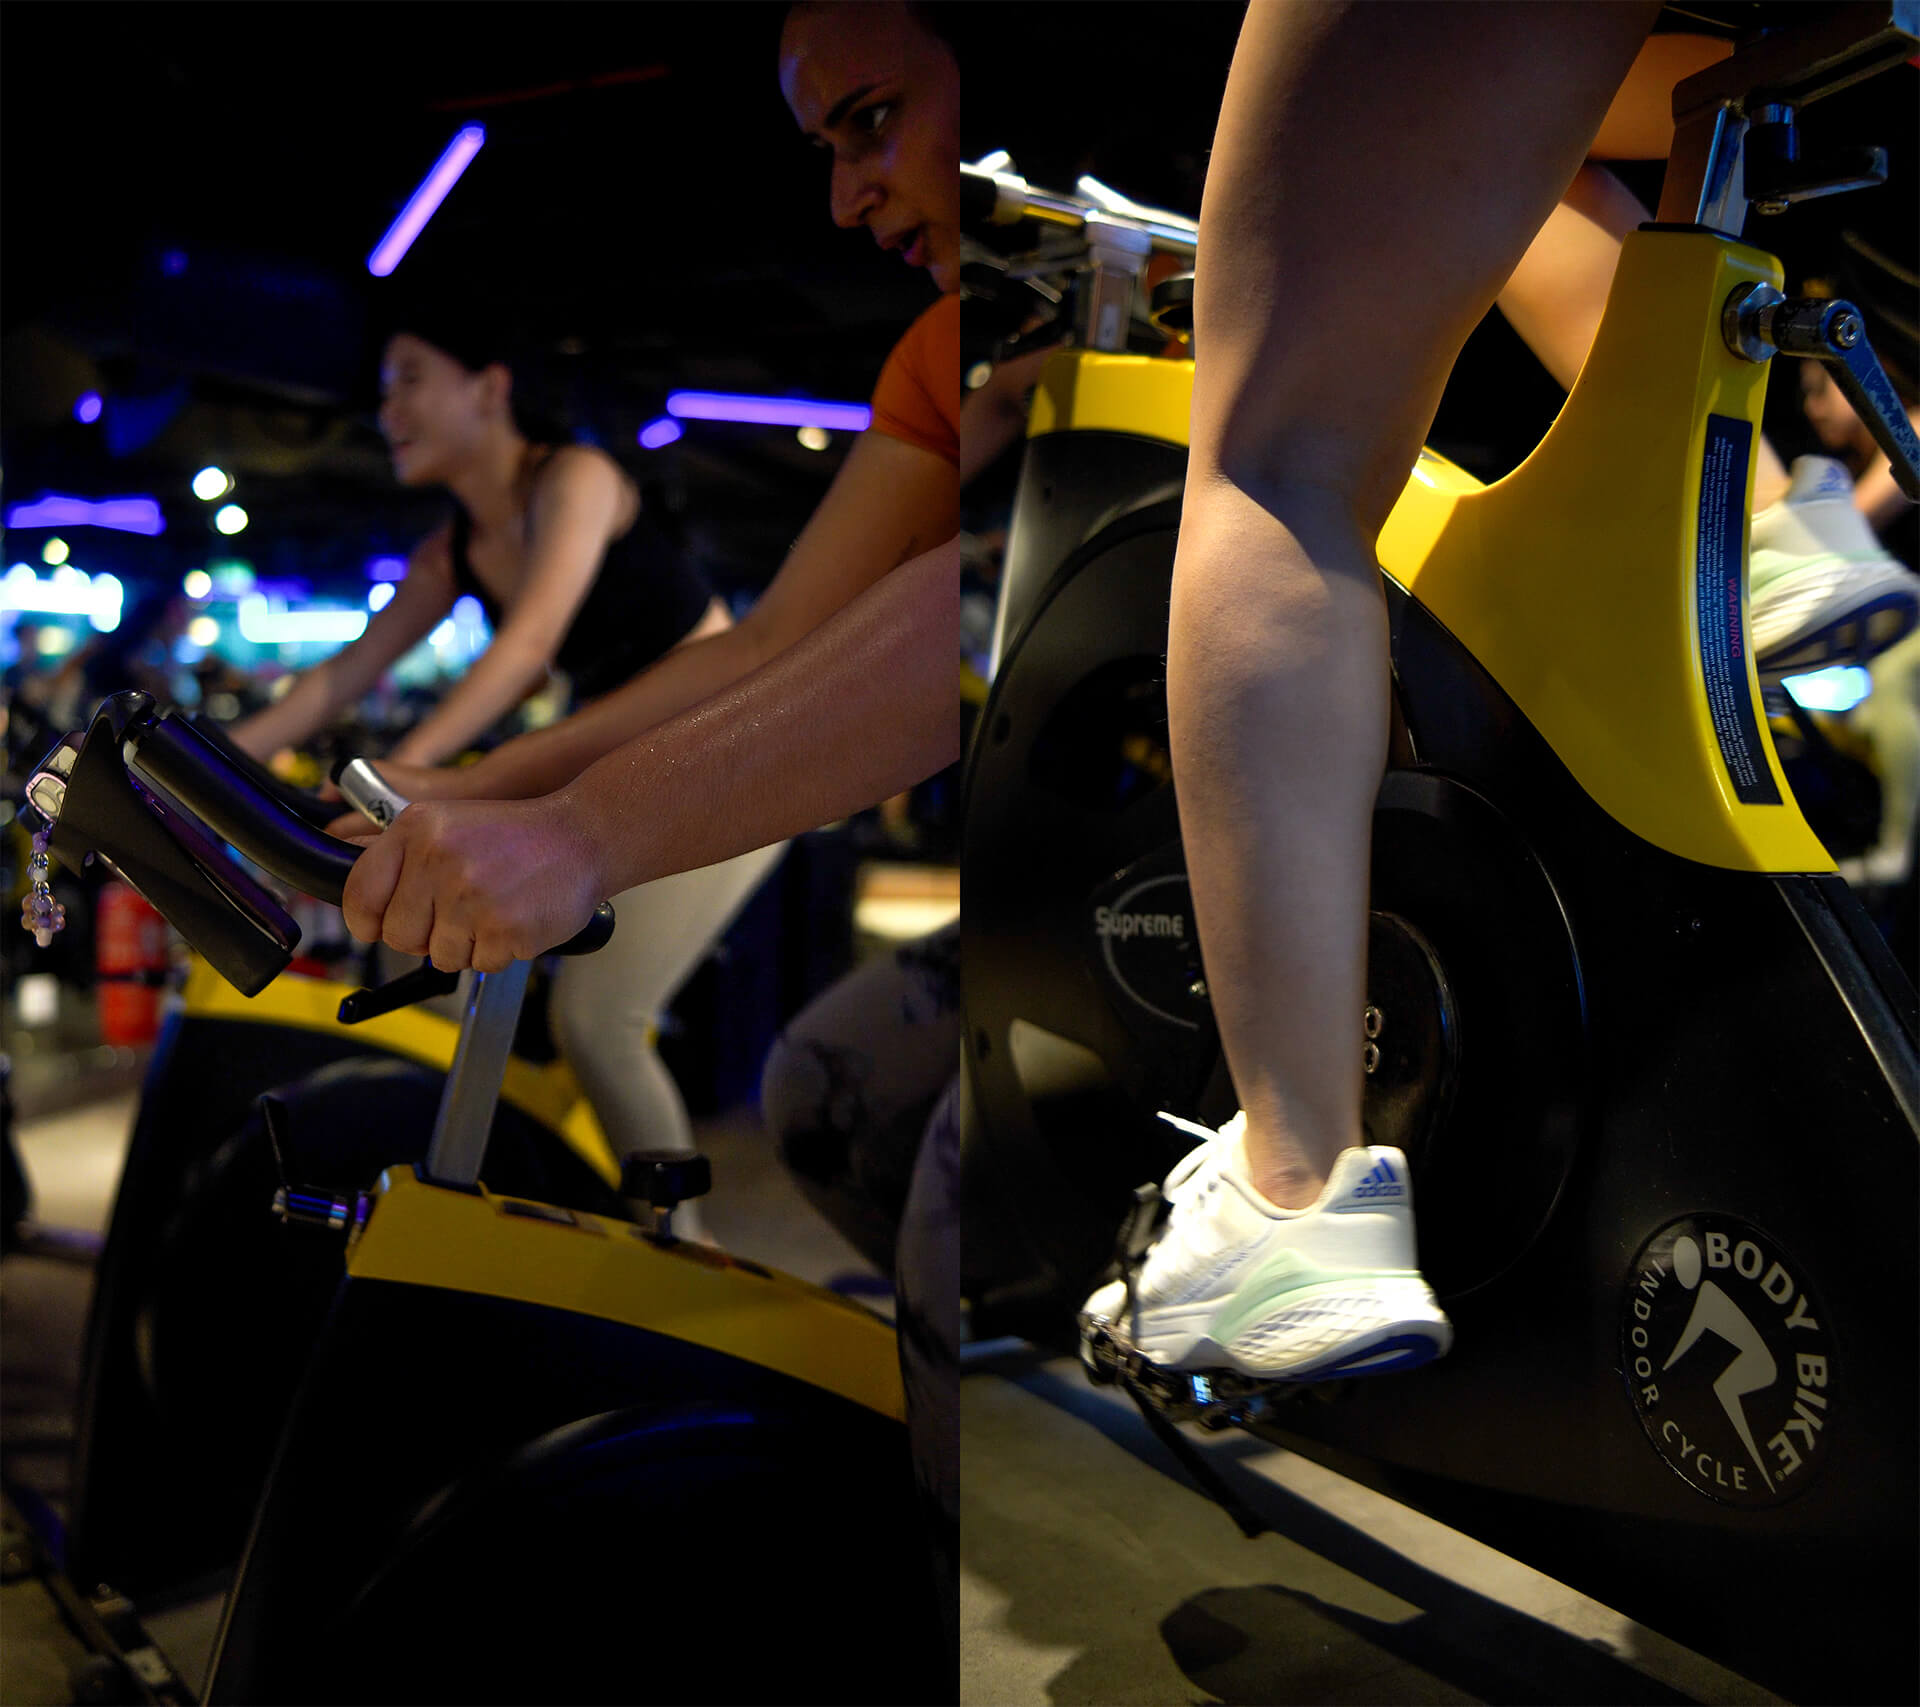 Spinning isn't just a cardiovascular workout - Work on those hamstrings!